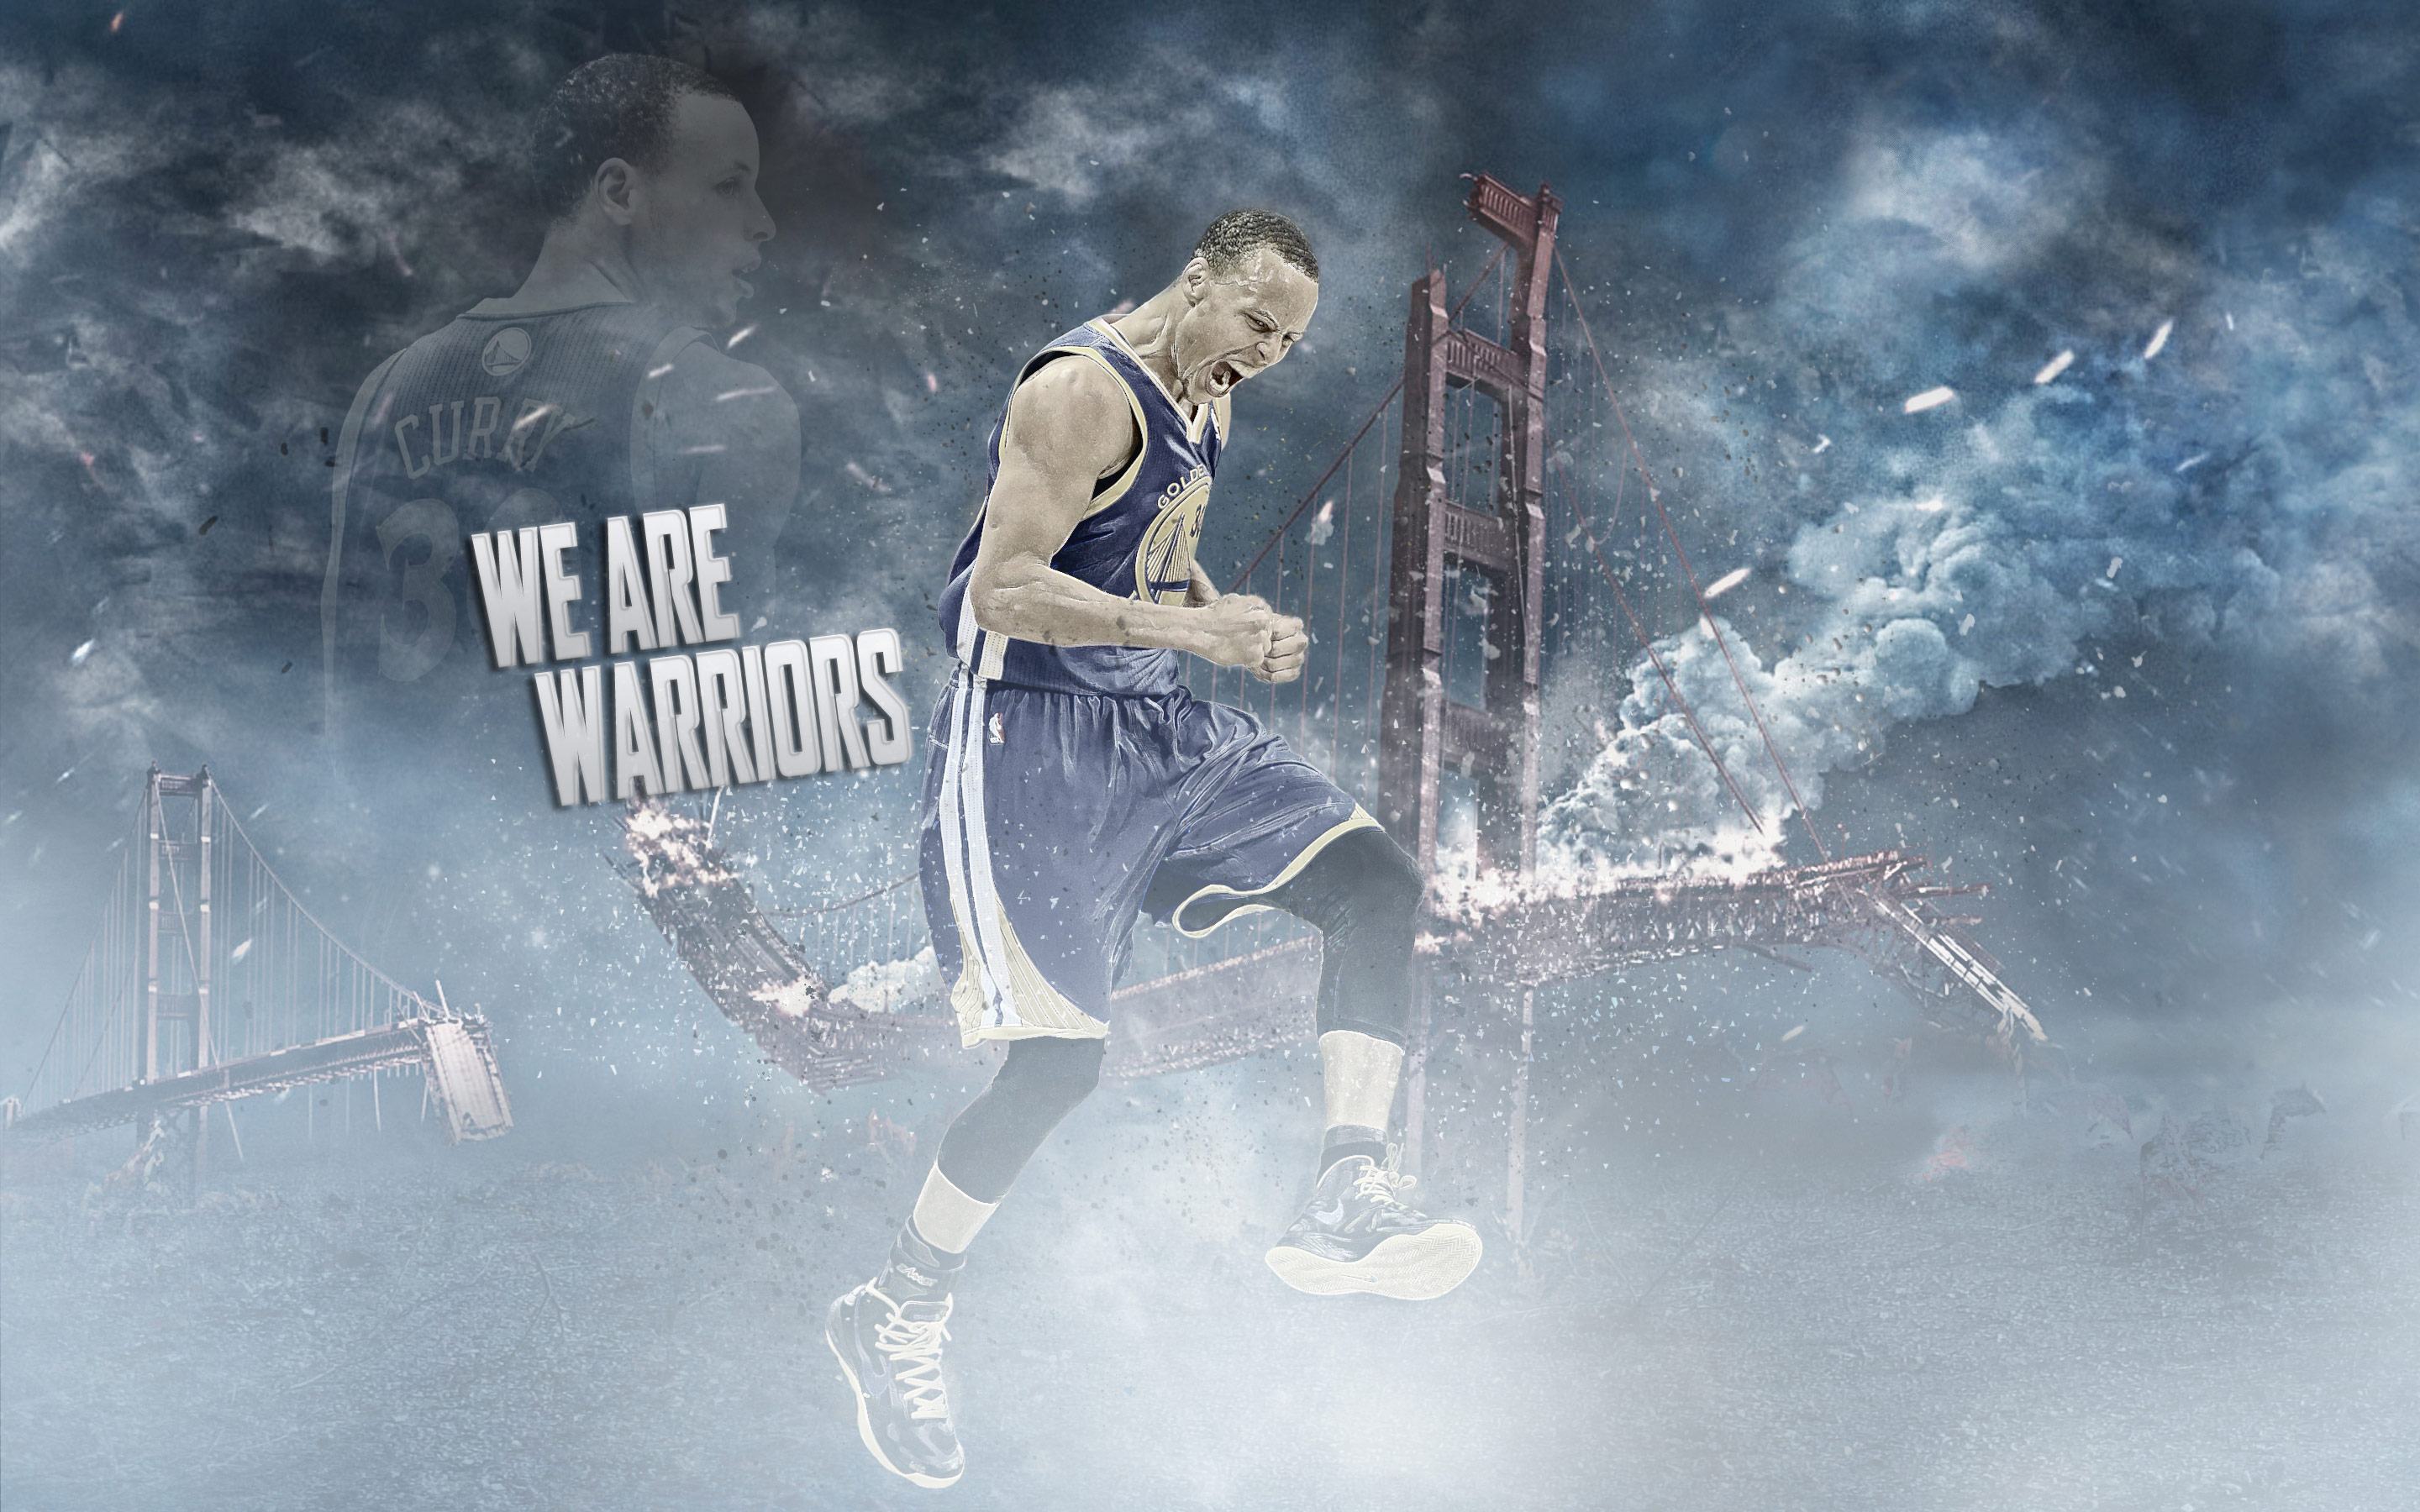 Stephen Curry 2013 2880×1800 Wallpaper | Basketball Wallpapers at